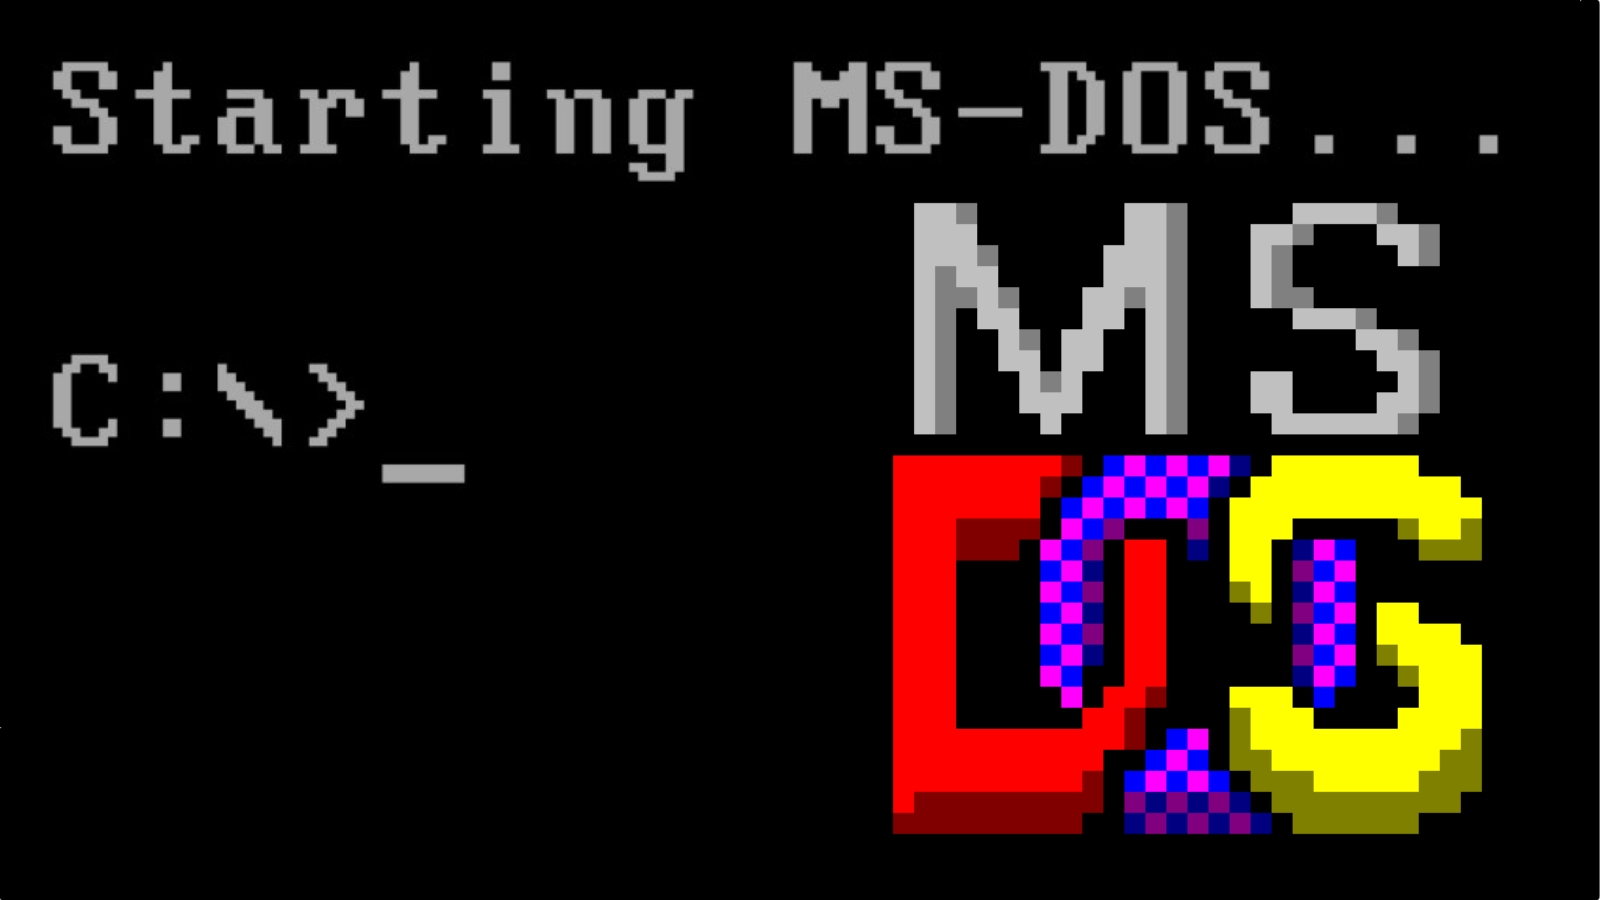 How To Install MS-DOS 6.22 And Windows 3.11 In A Virtual Machine